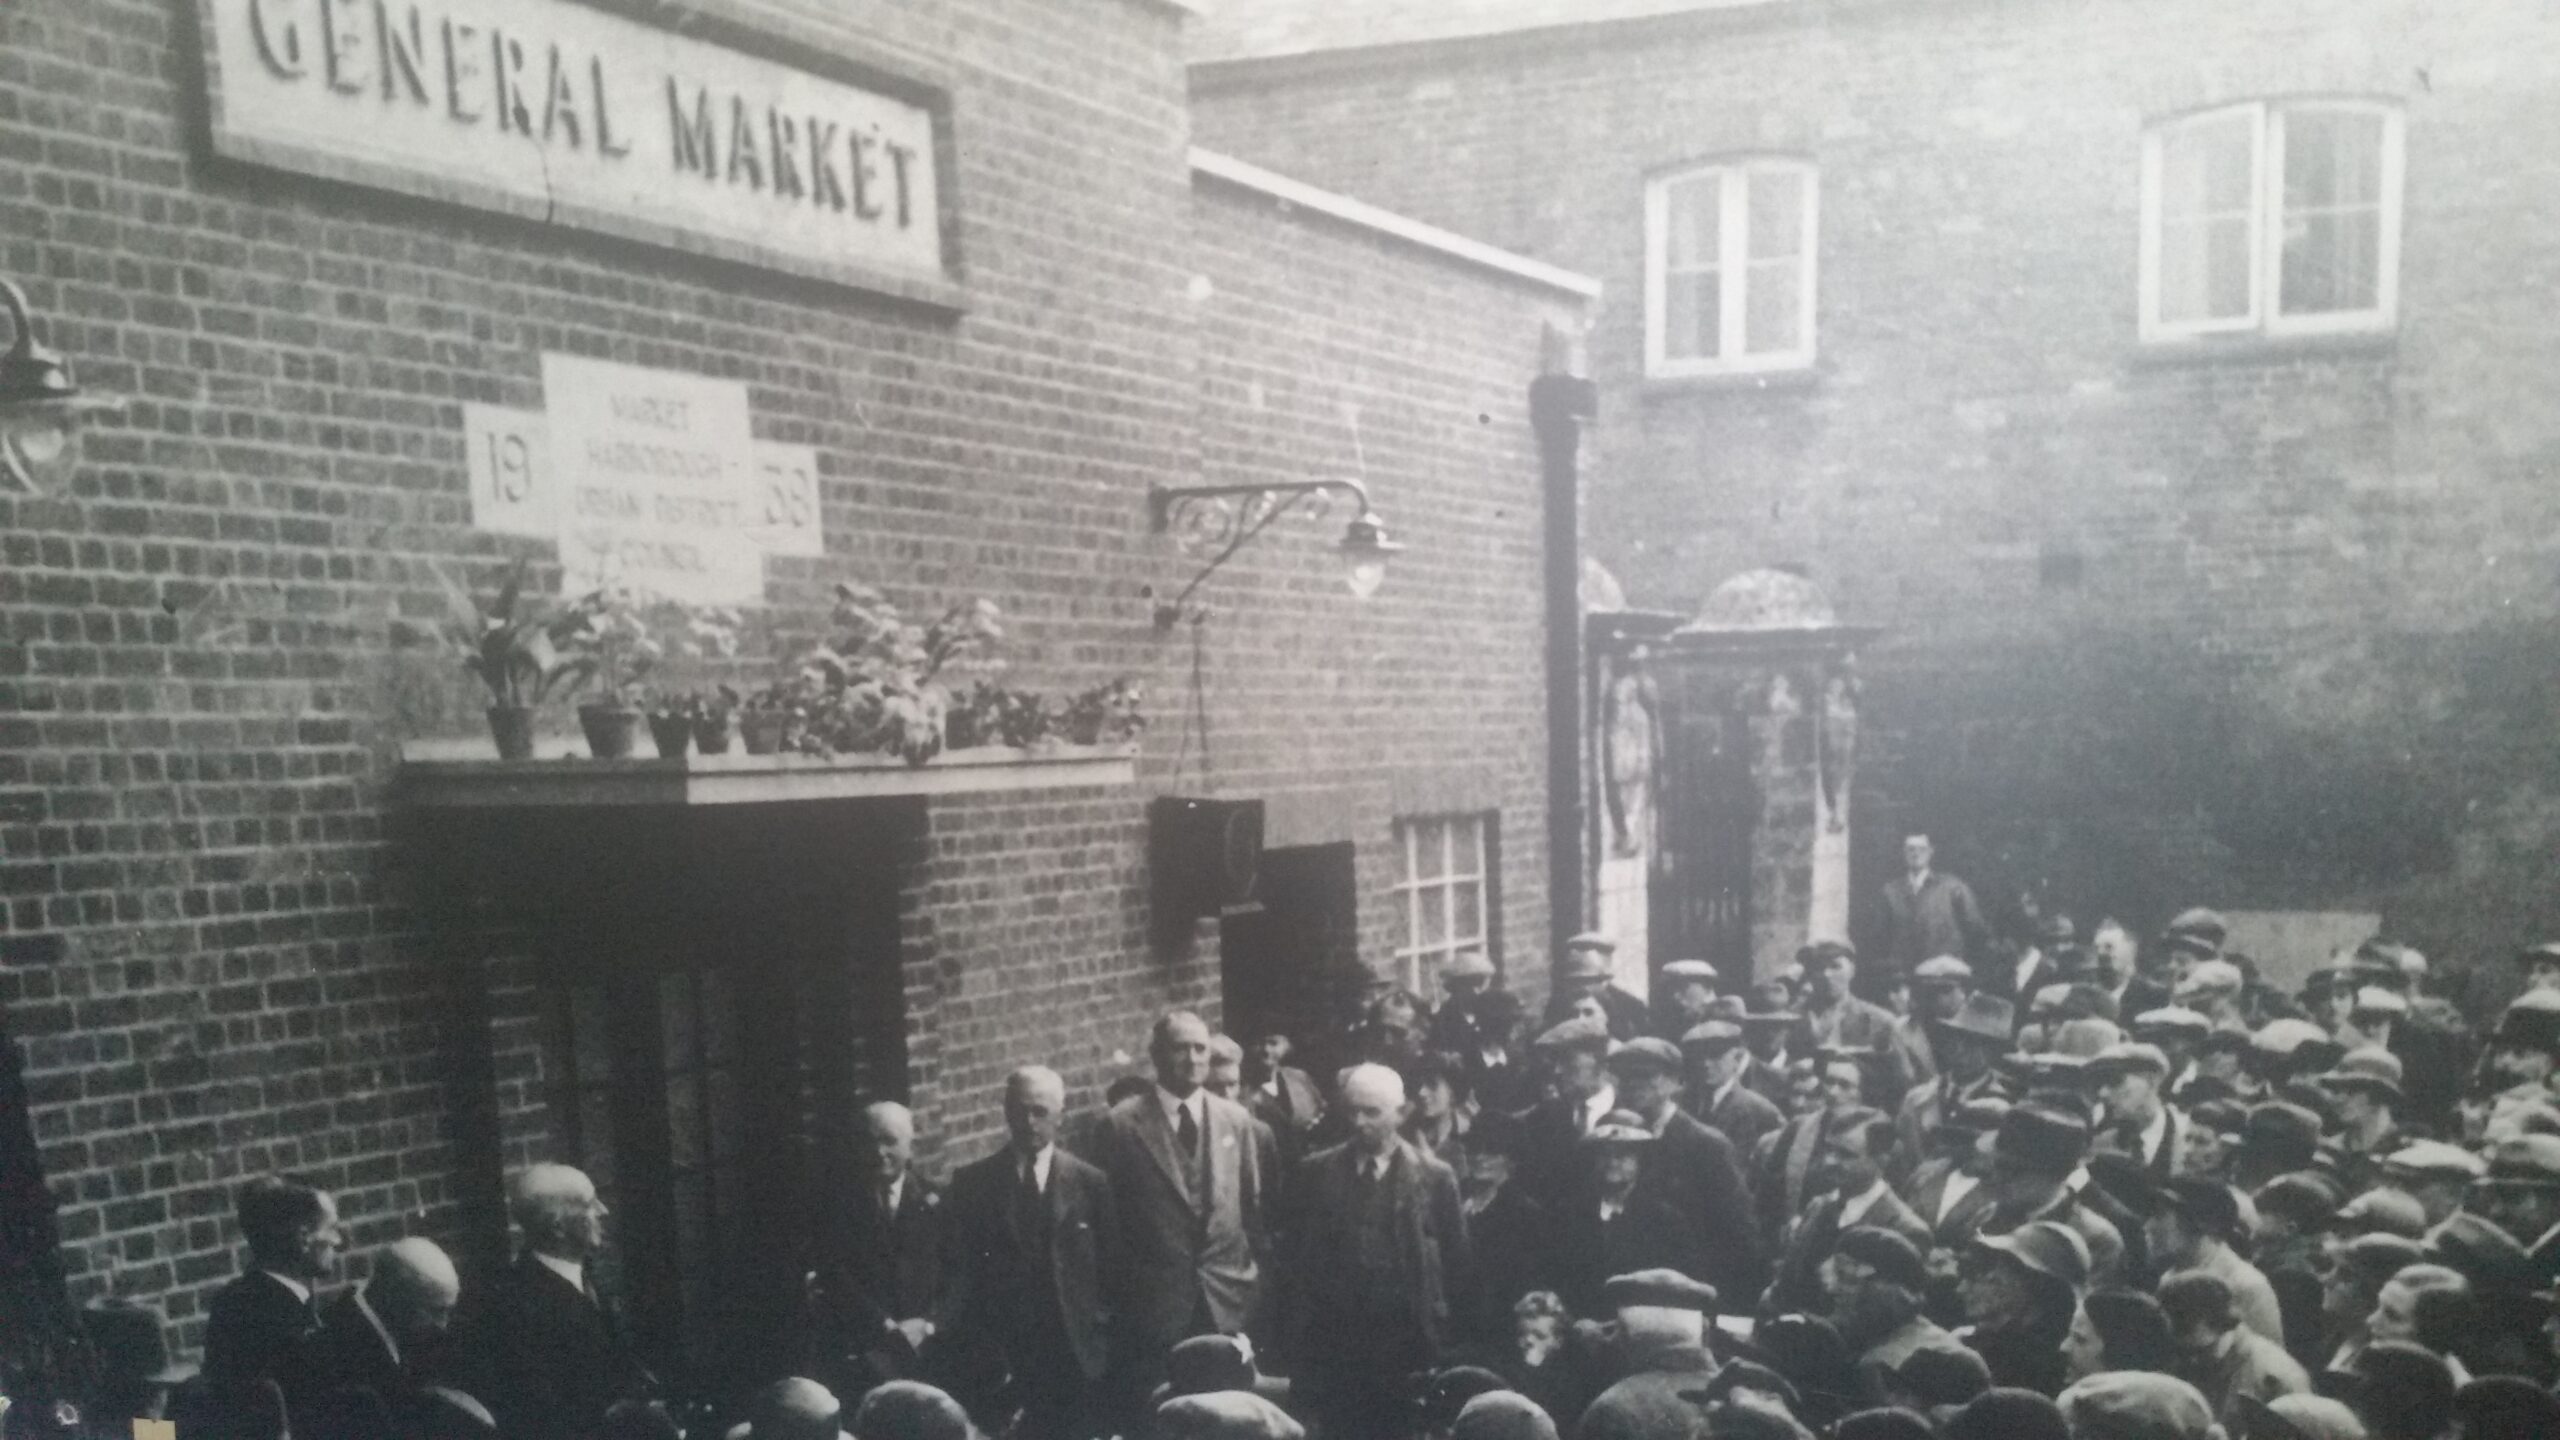 The old general market in Market Harborough